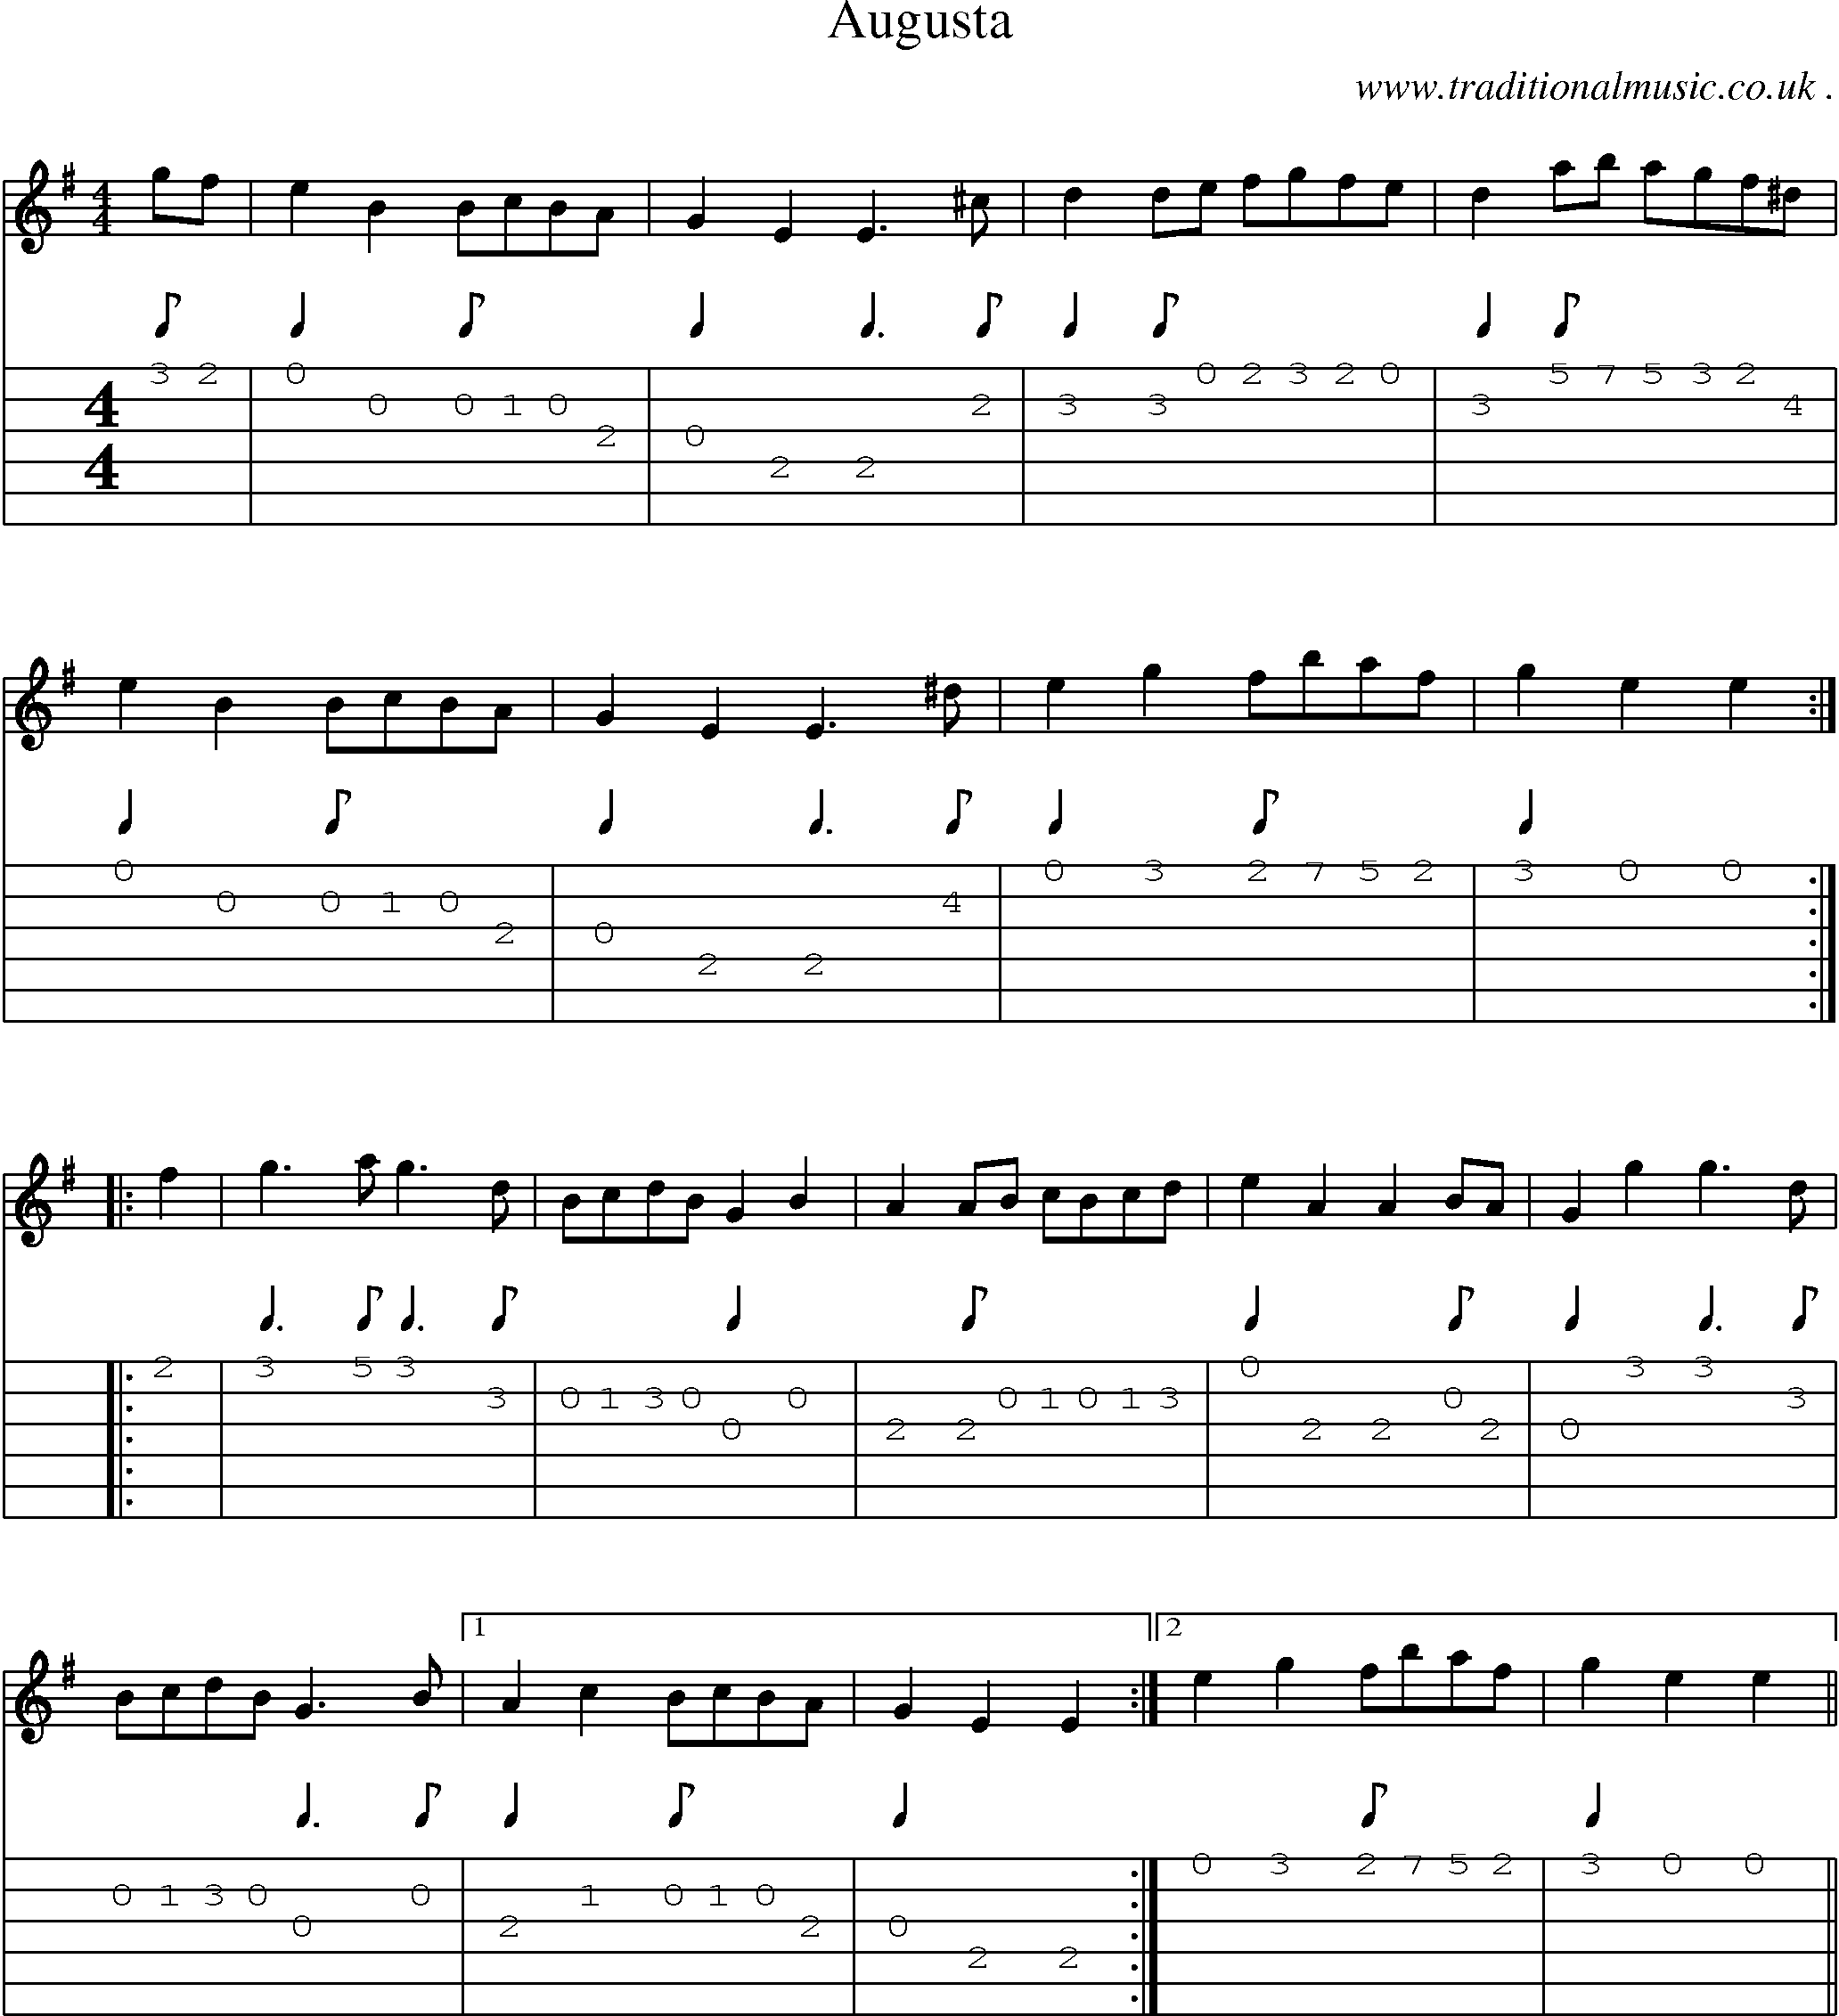 Sheet-Music and Guitar Tabs for Augusta